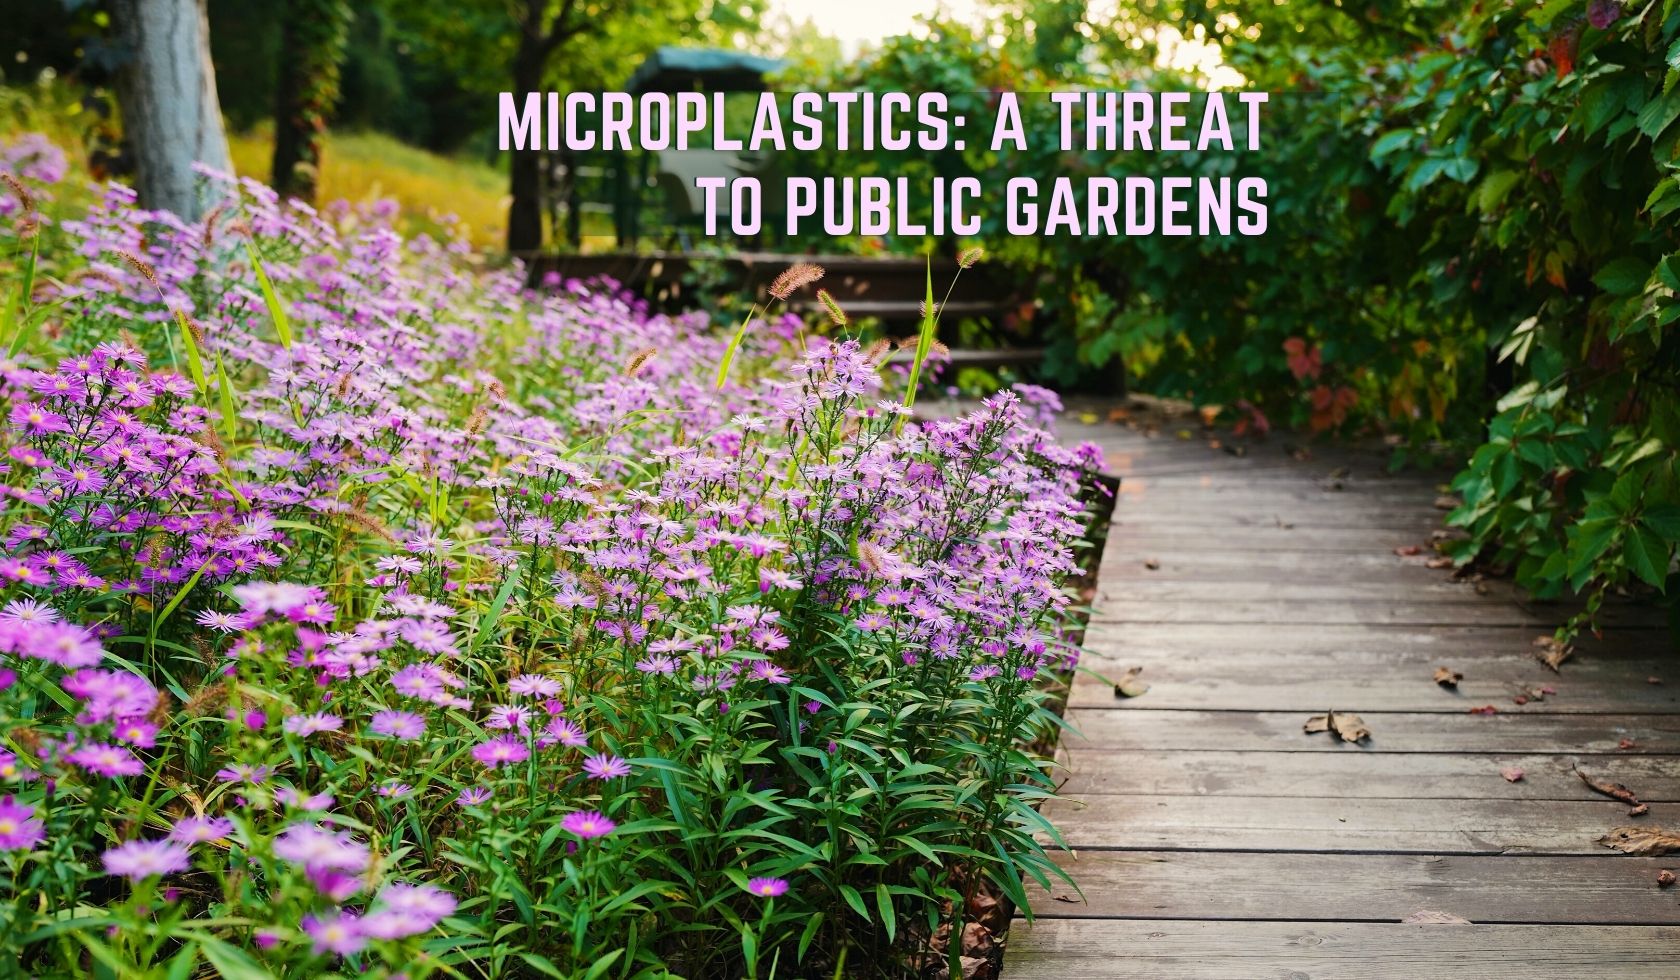 Microplastics Are Wreaking Havoc On Our Public Gardens